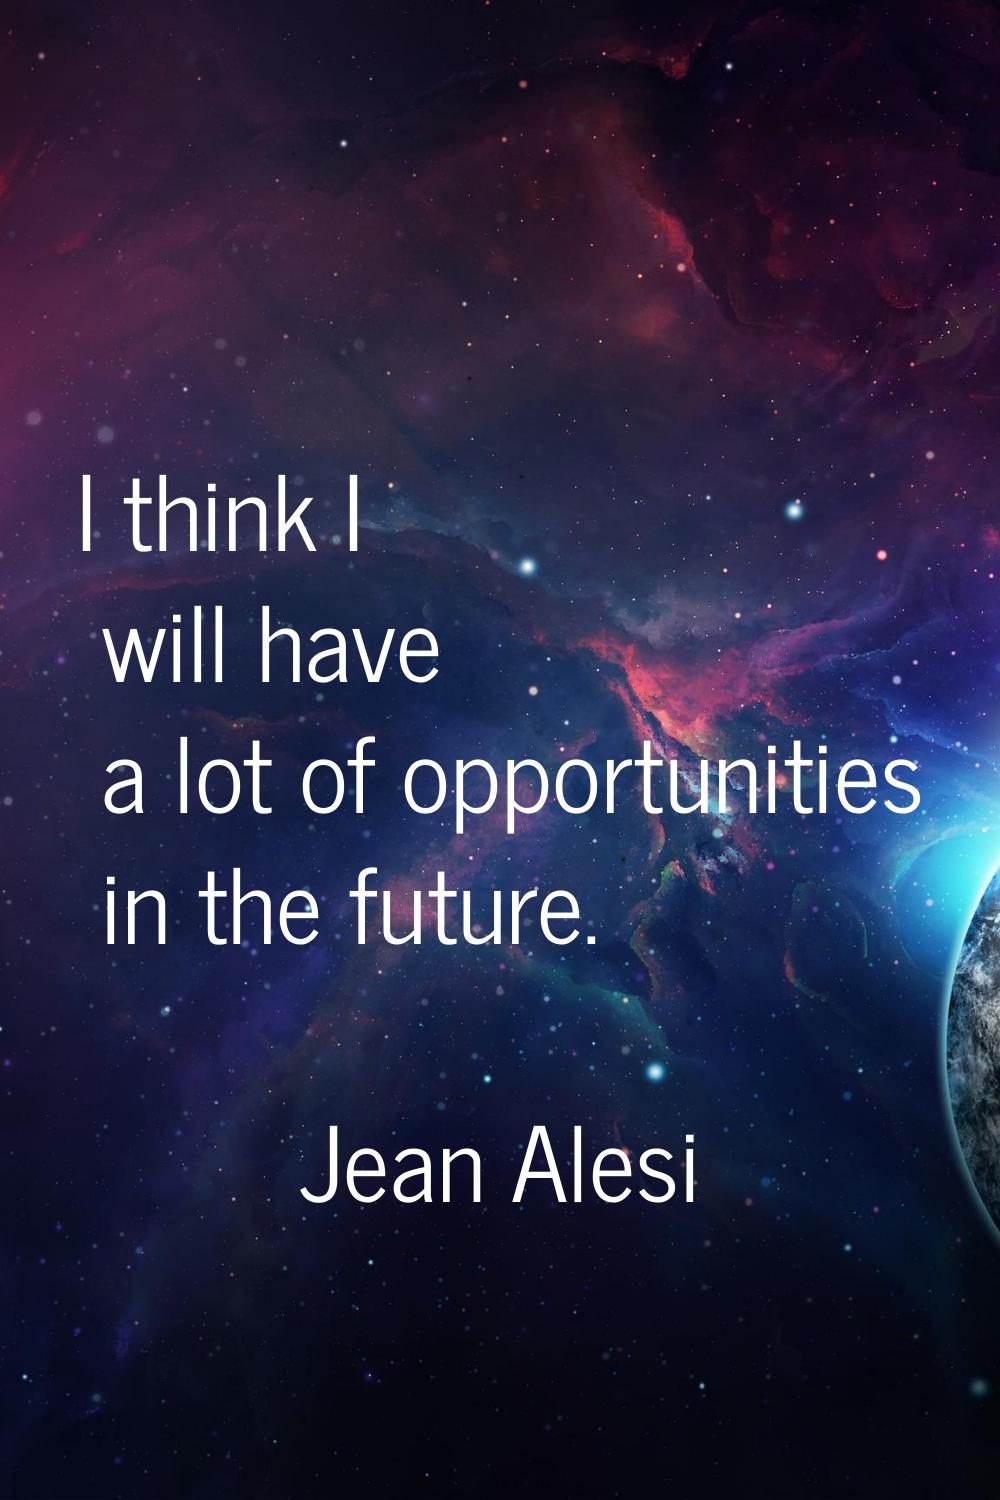 I think I will have a lot of opportunities in the future.